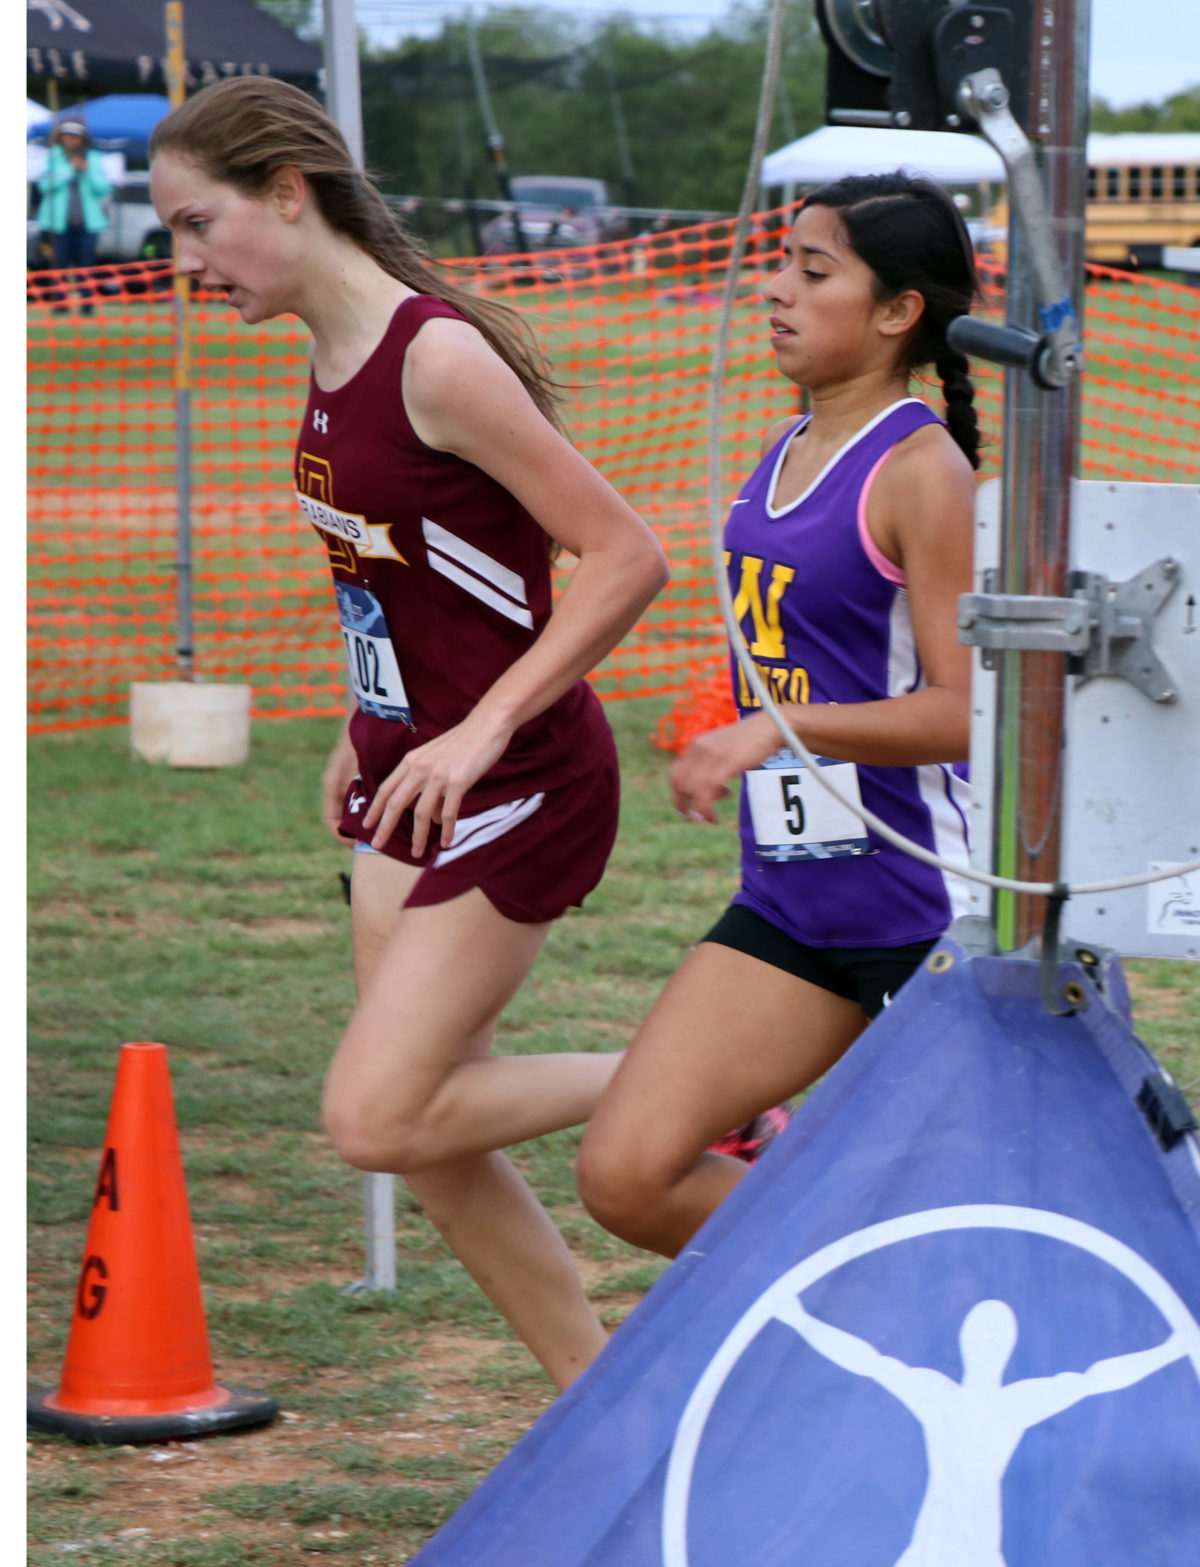 Timing, filming errors cost Runyan 1st place in District XC meet